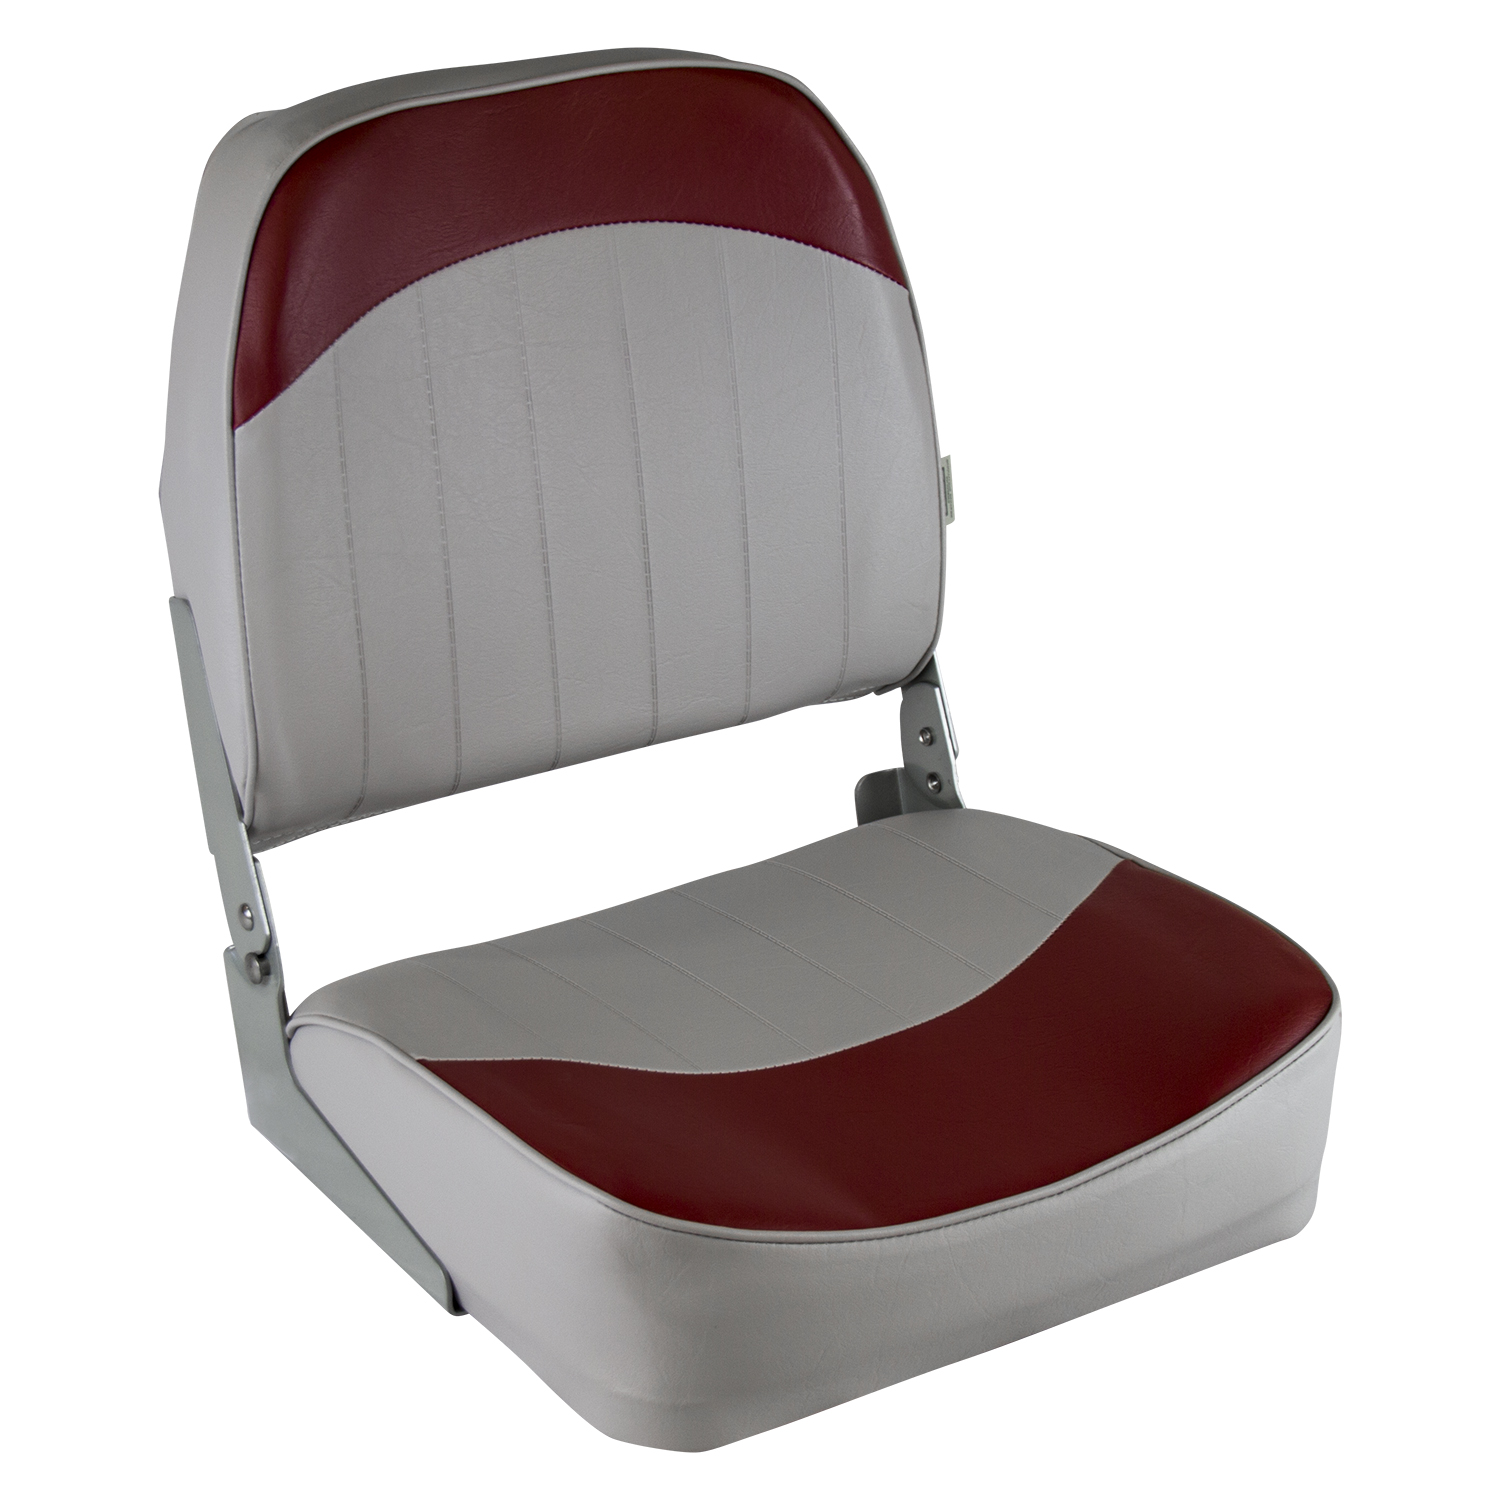 Wise 8WD734PLS-661 Low Back Boat Seat, Grey / Red - image 1 of 6